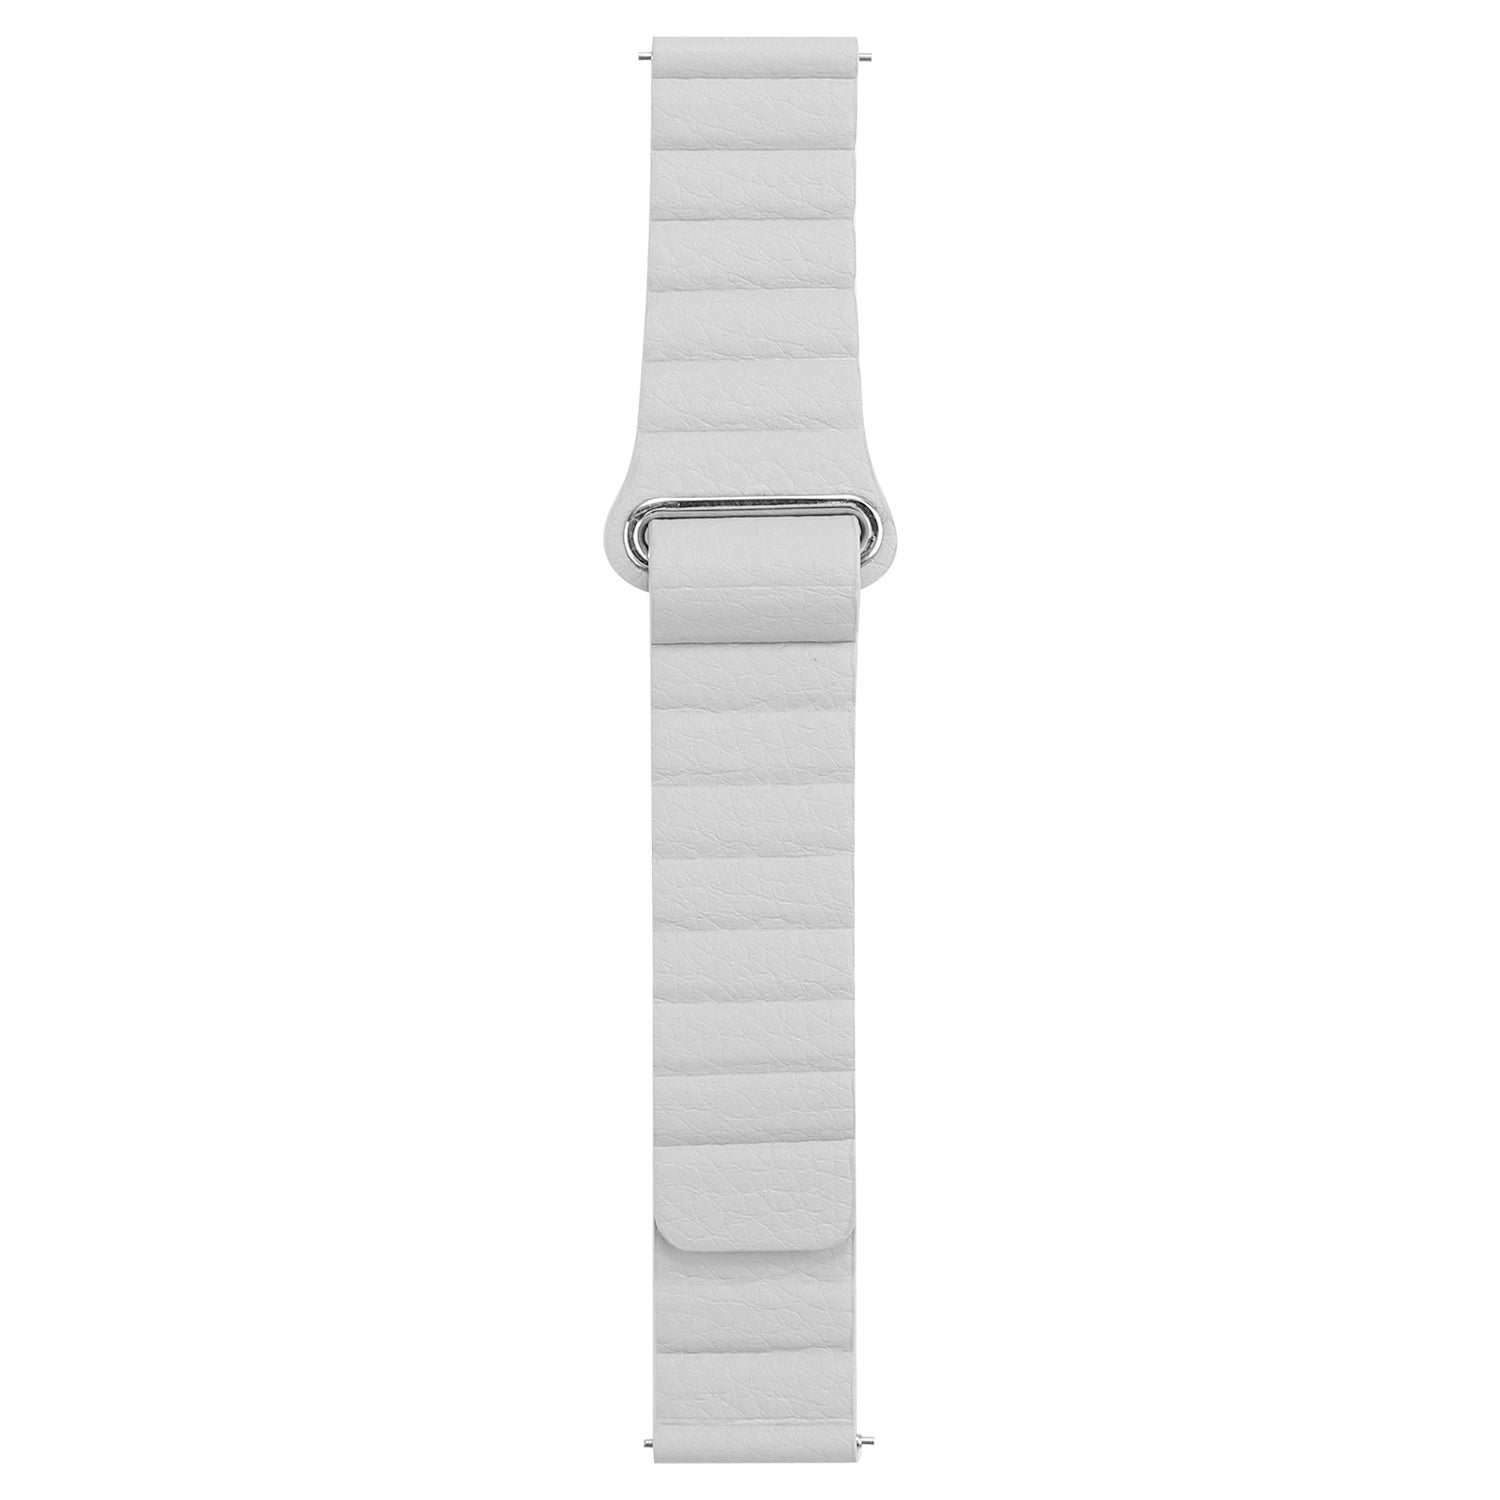 Genuine Leather Watchband Replacement 18mm for Garmin Move 3S/Active S - White